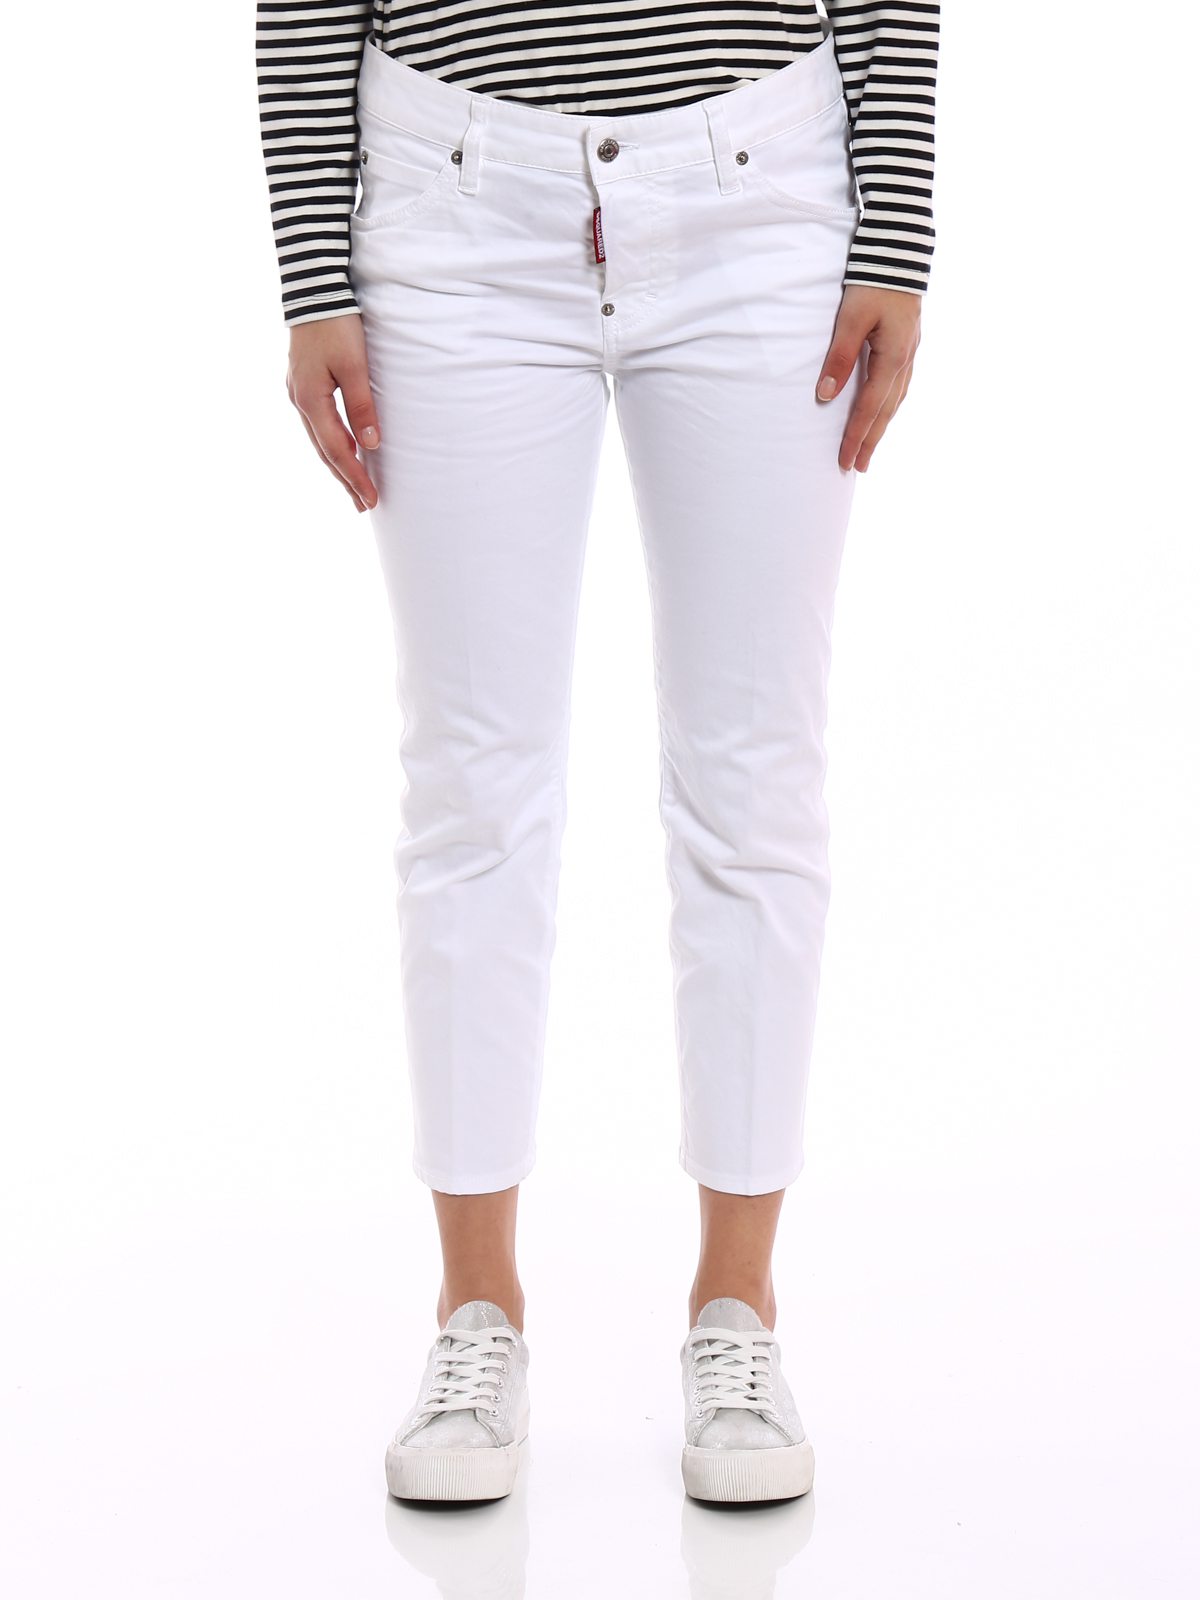 Womens Jeans DSquared² Jeans DSquared² Cool Girl White Denim Jeans Save 76% 